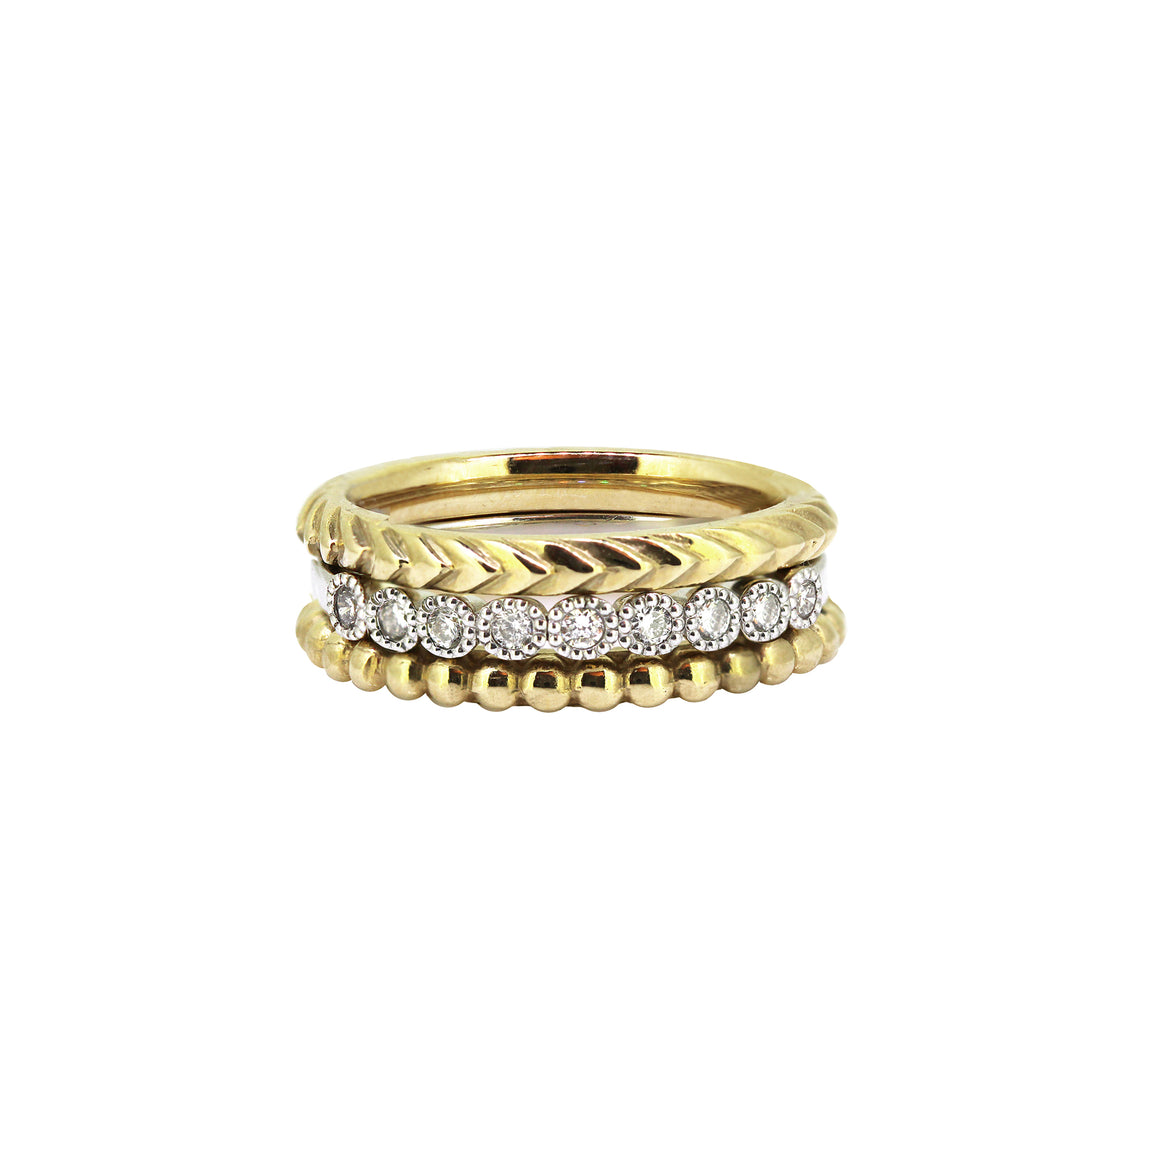 Milan stack rings. Comprised of Armour ring, Bud diamond ring and Ball stick ring